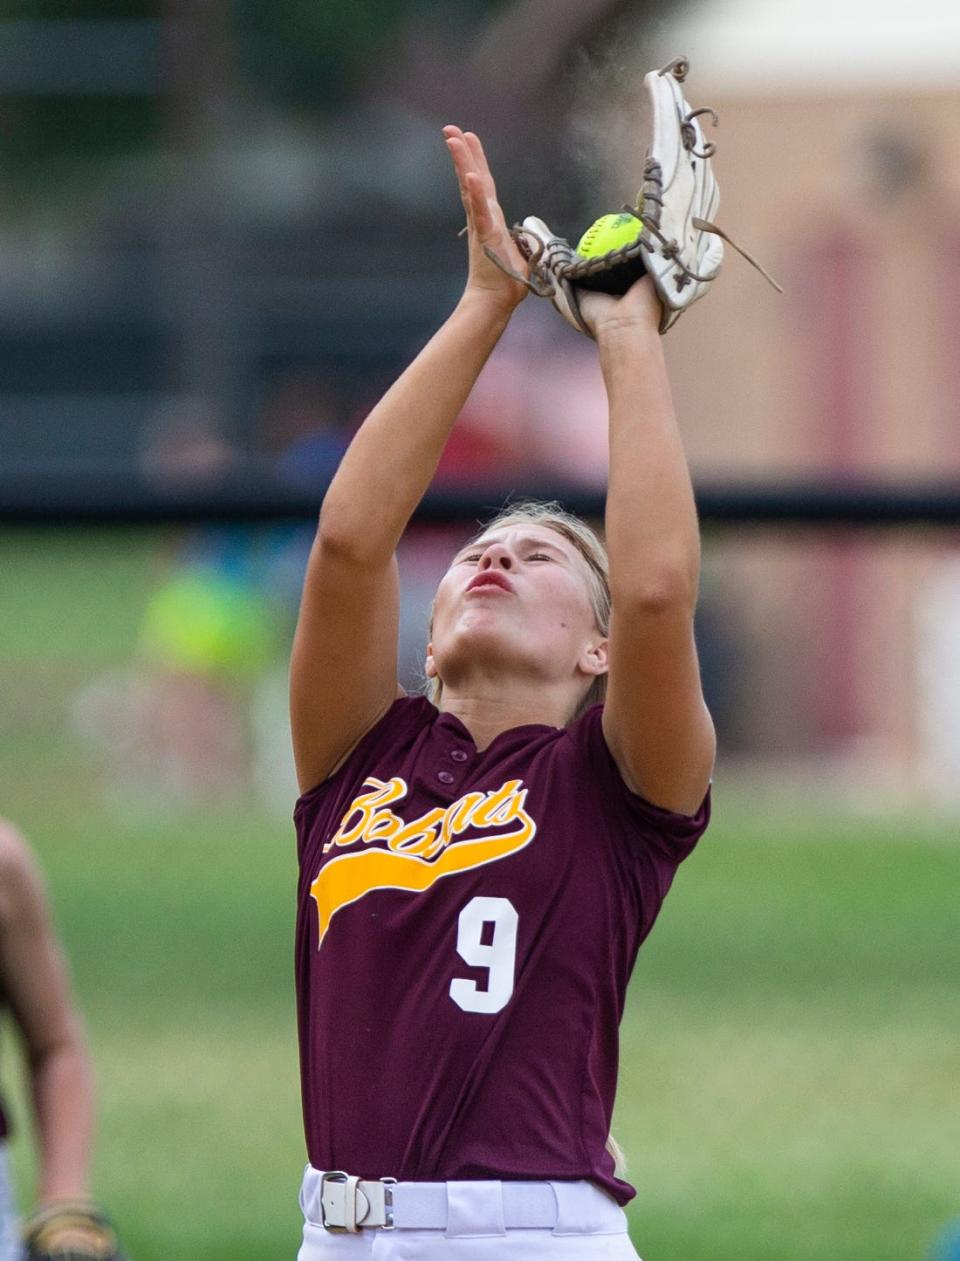 Brandywine's Chloe Parker makes a catch during the Brandywine vs. Constantine district softball game Tuesday, May 31, 2022 at Buchanan High School. 